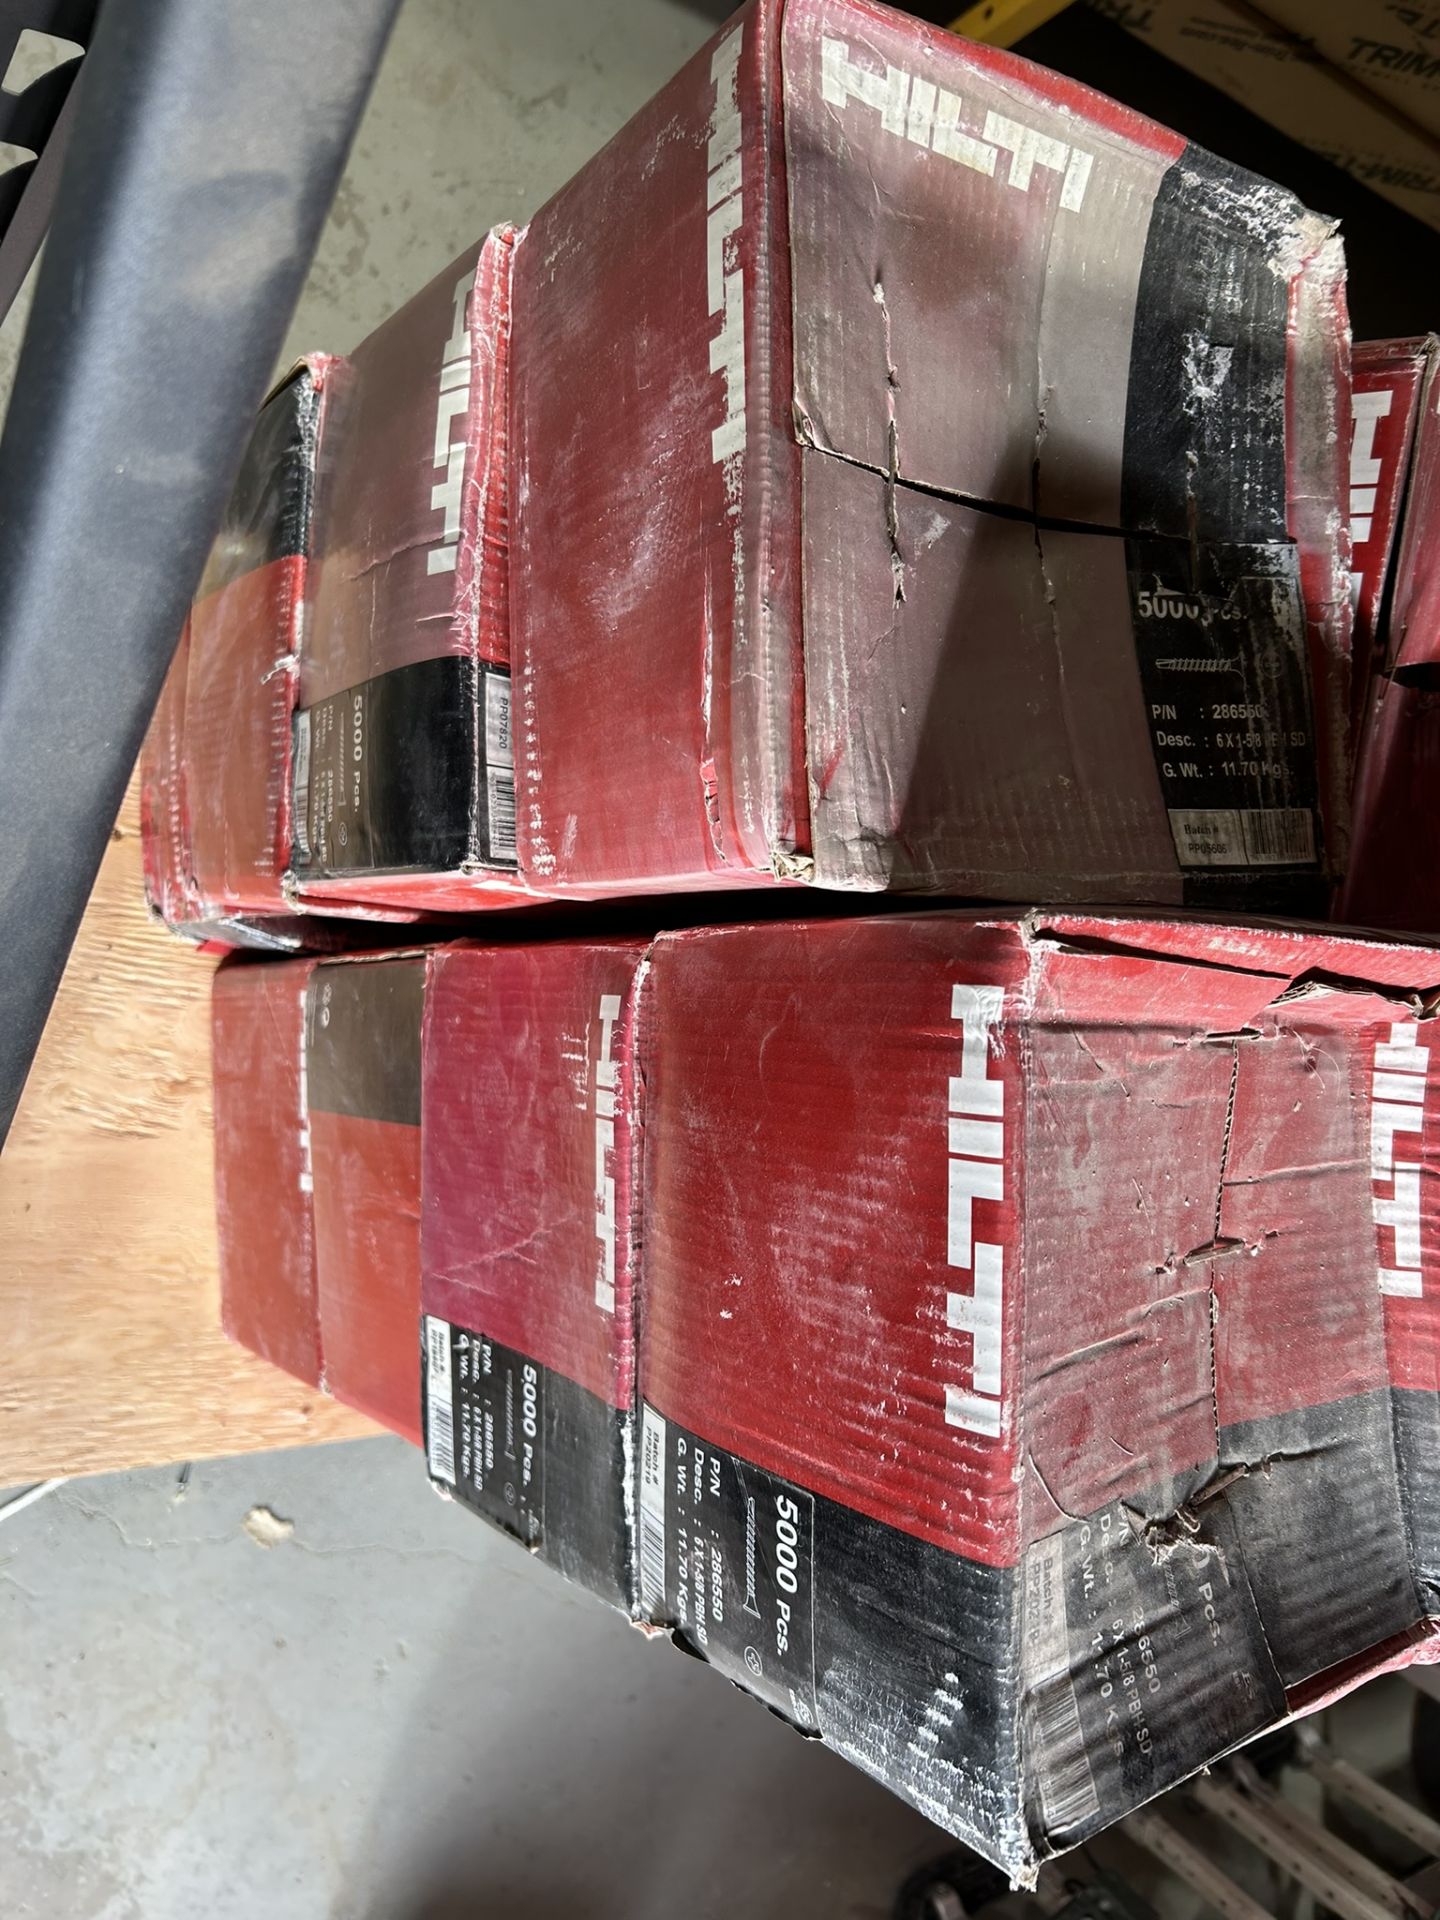 8-BOXES OF HILTI 6 X 1-5-8" PBH SD DRYWALL SCREWS (TIMES THE MONEY X8) - Image 2 of 3